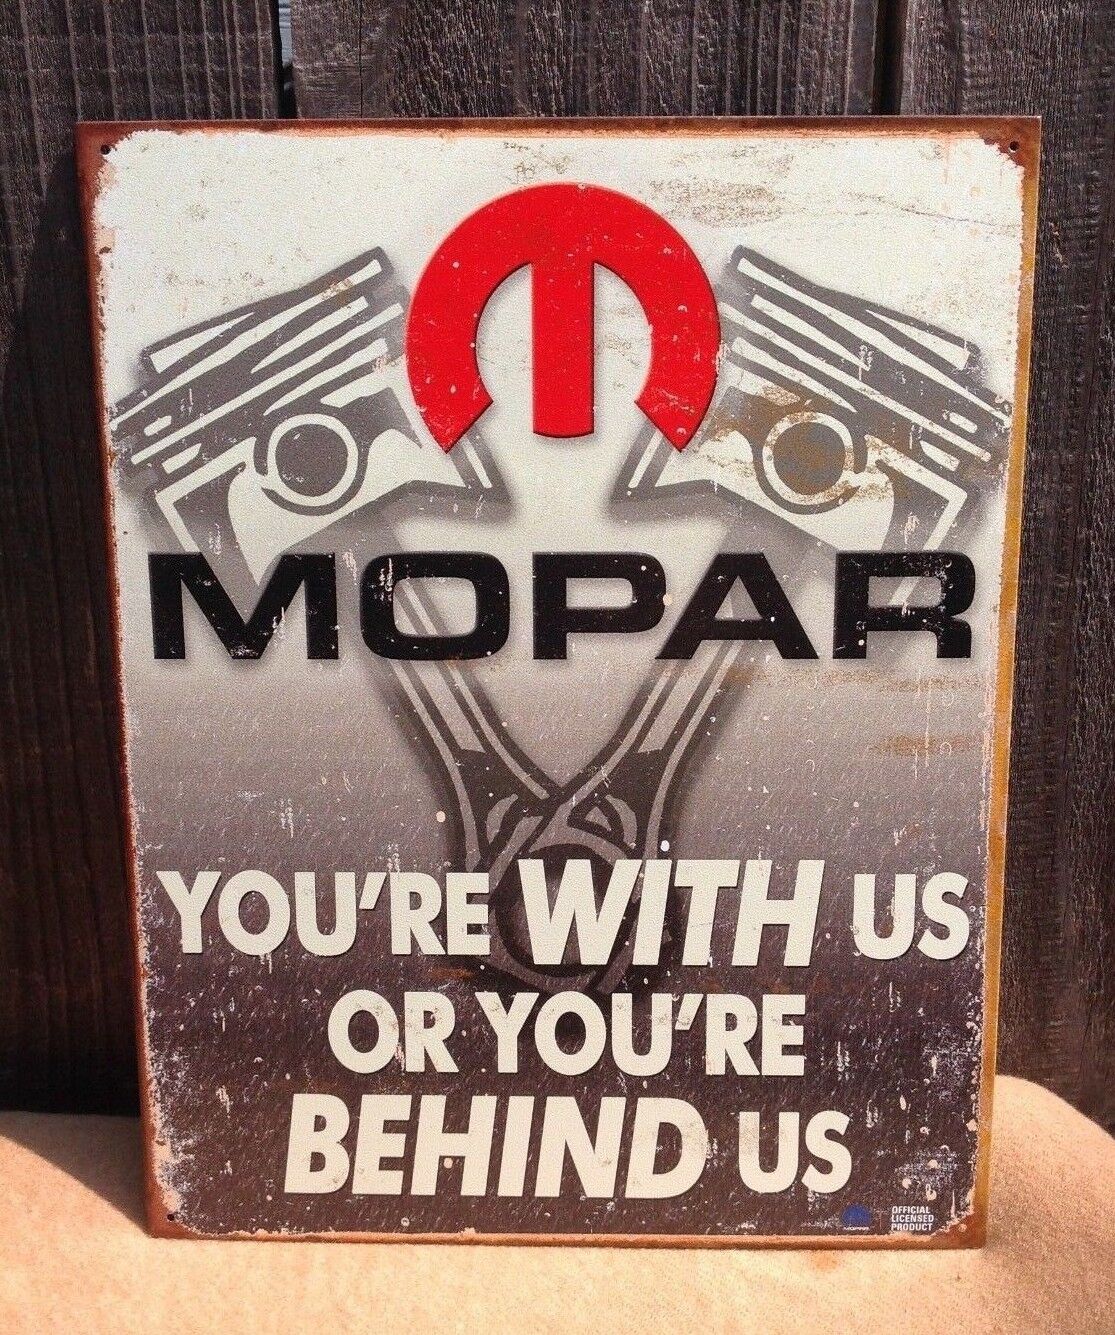 Mopar With Us or Behind Us Metal Sign Tin Vintage Garage Auto Gas Oil Rustic 